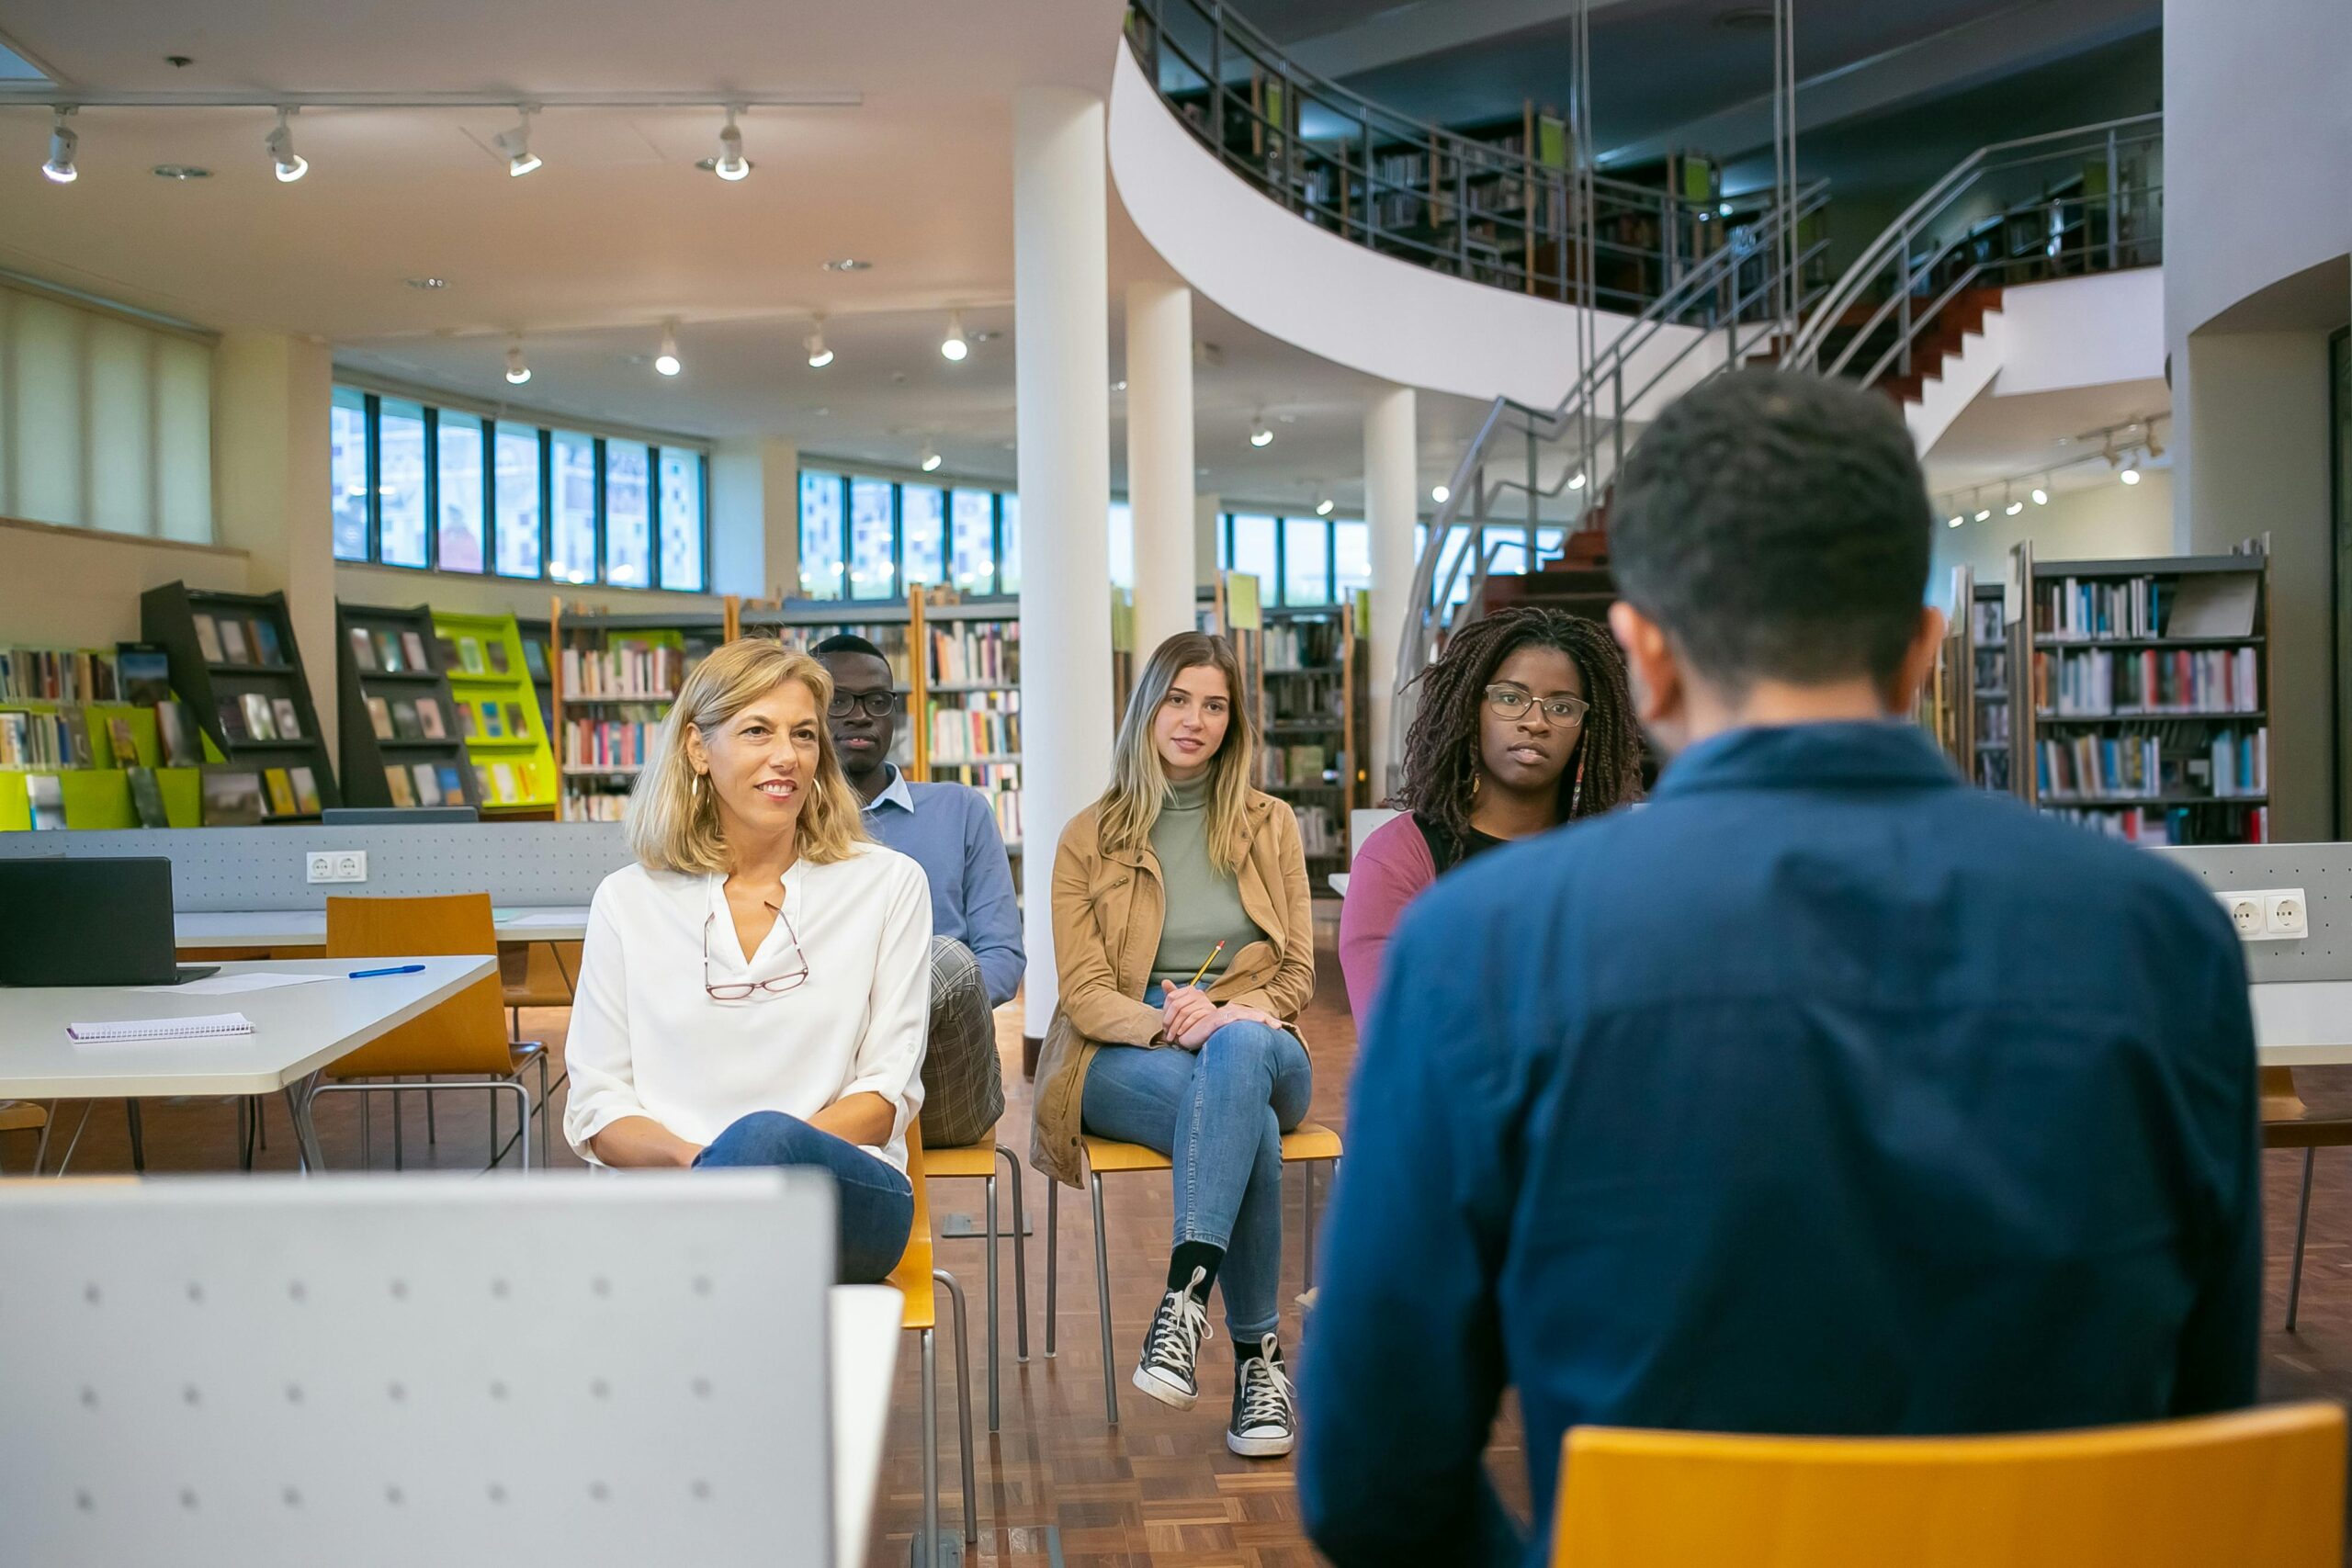 Elevating the Visibility of School Library Programs Through Social Proof